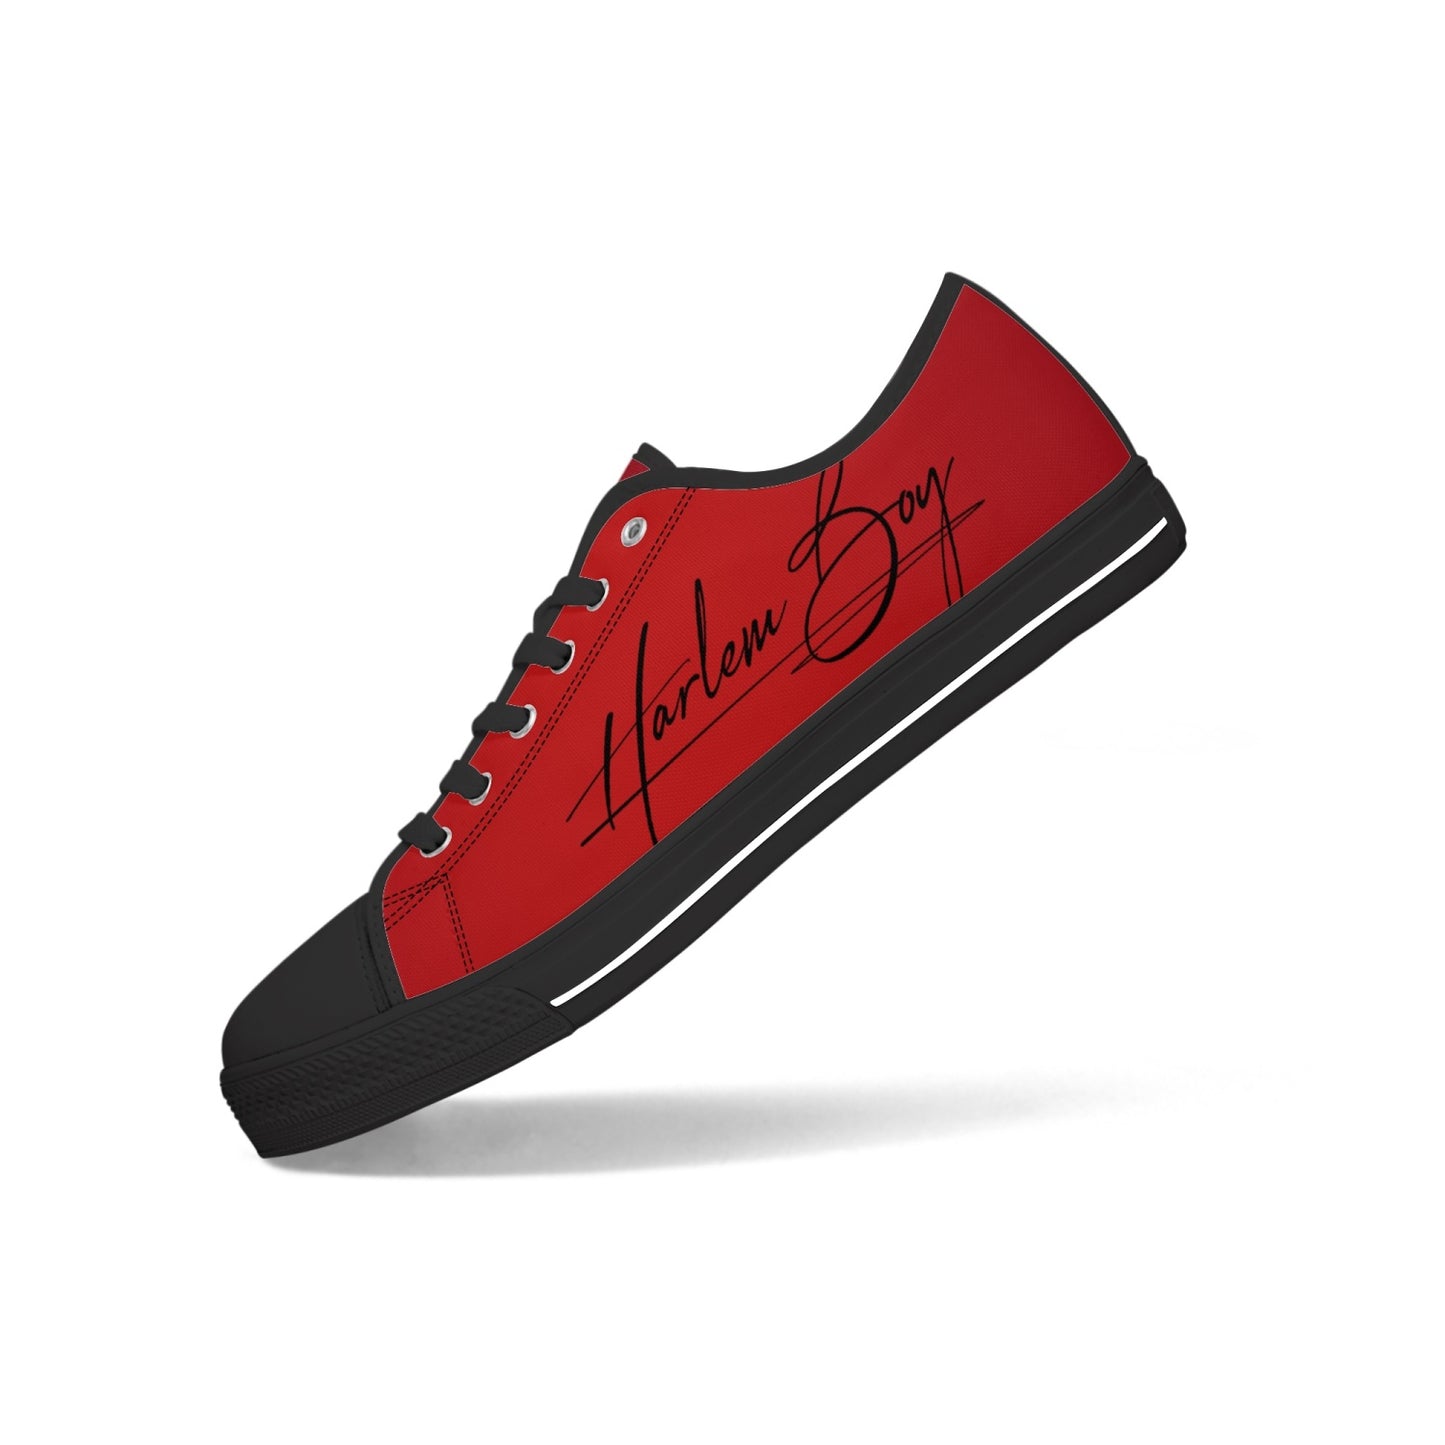 Harlem Boy "Lenox Ave" Unisex Classic Low Tops - Ruby (Black or White Sole)